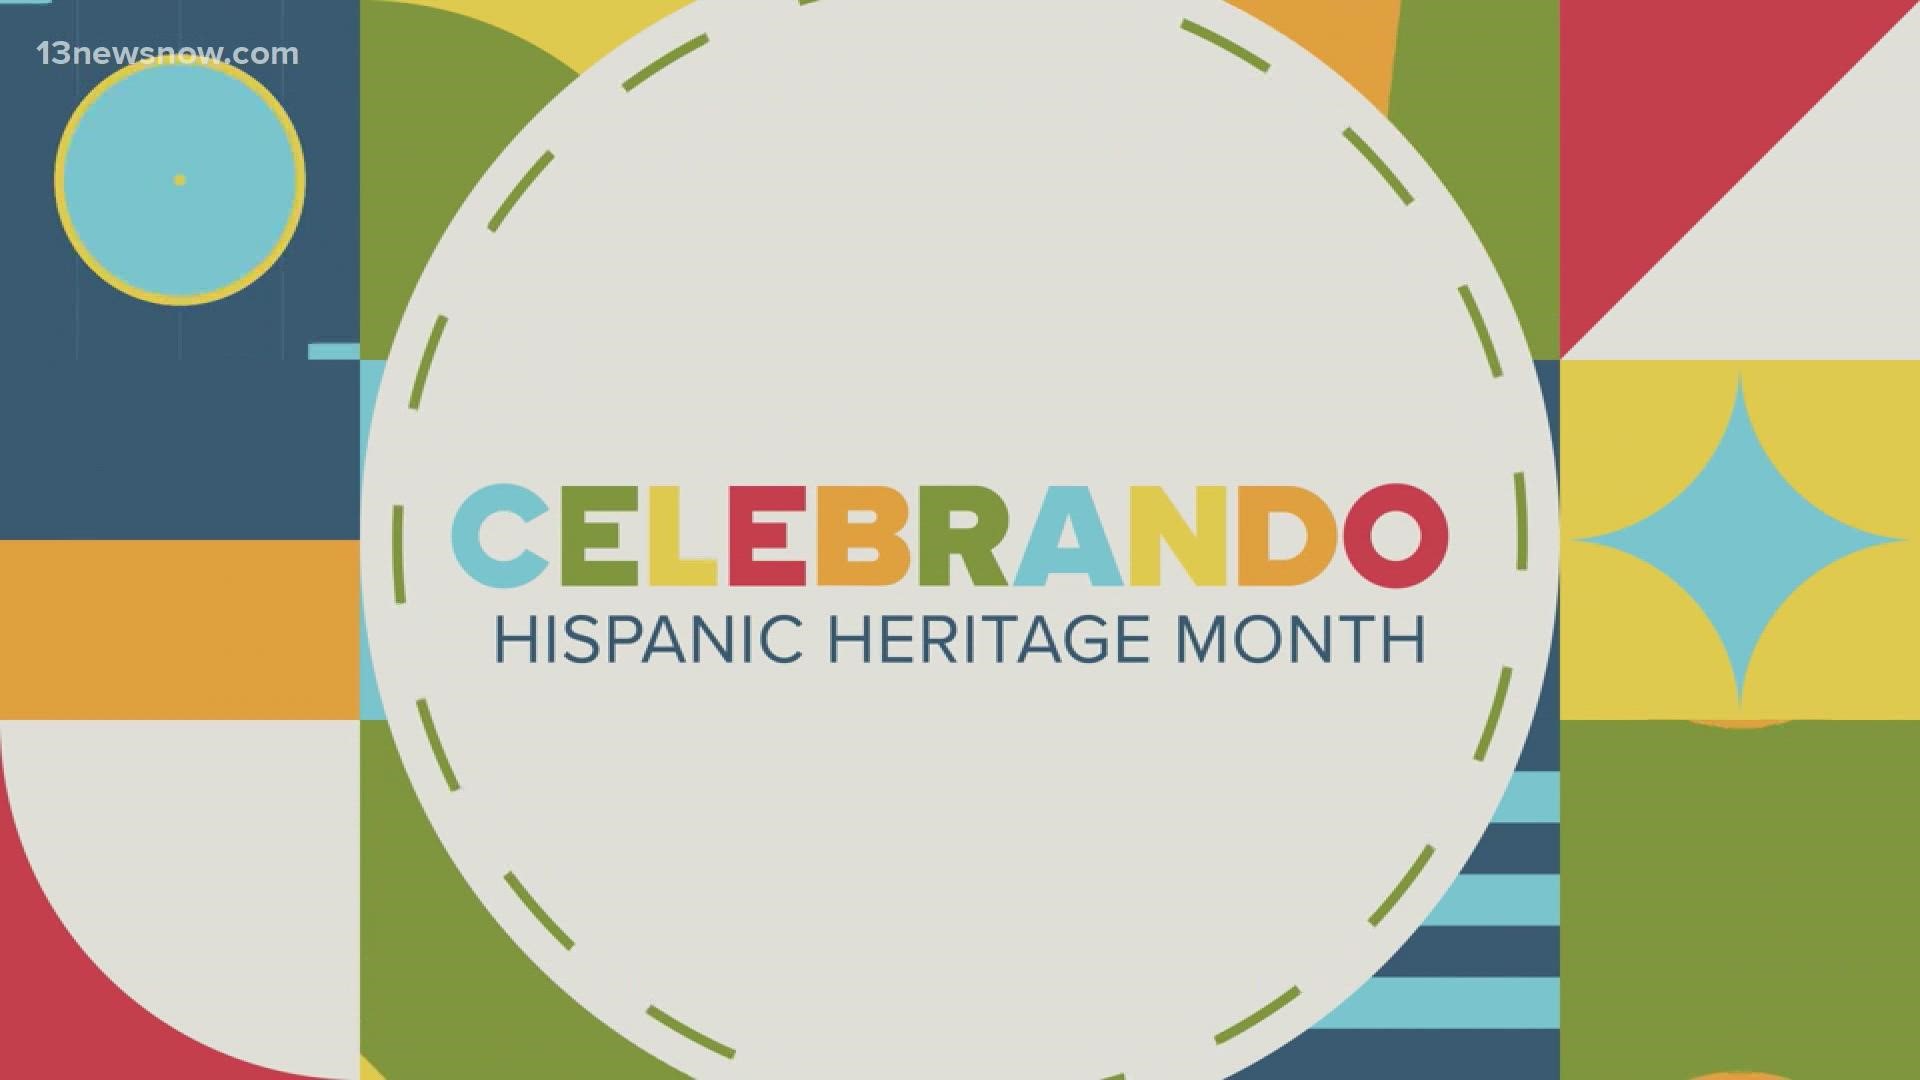 September 15 marks the first day of Hispanic Heritage Month and we're digging a little deeper into the history behind it.